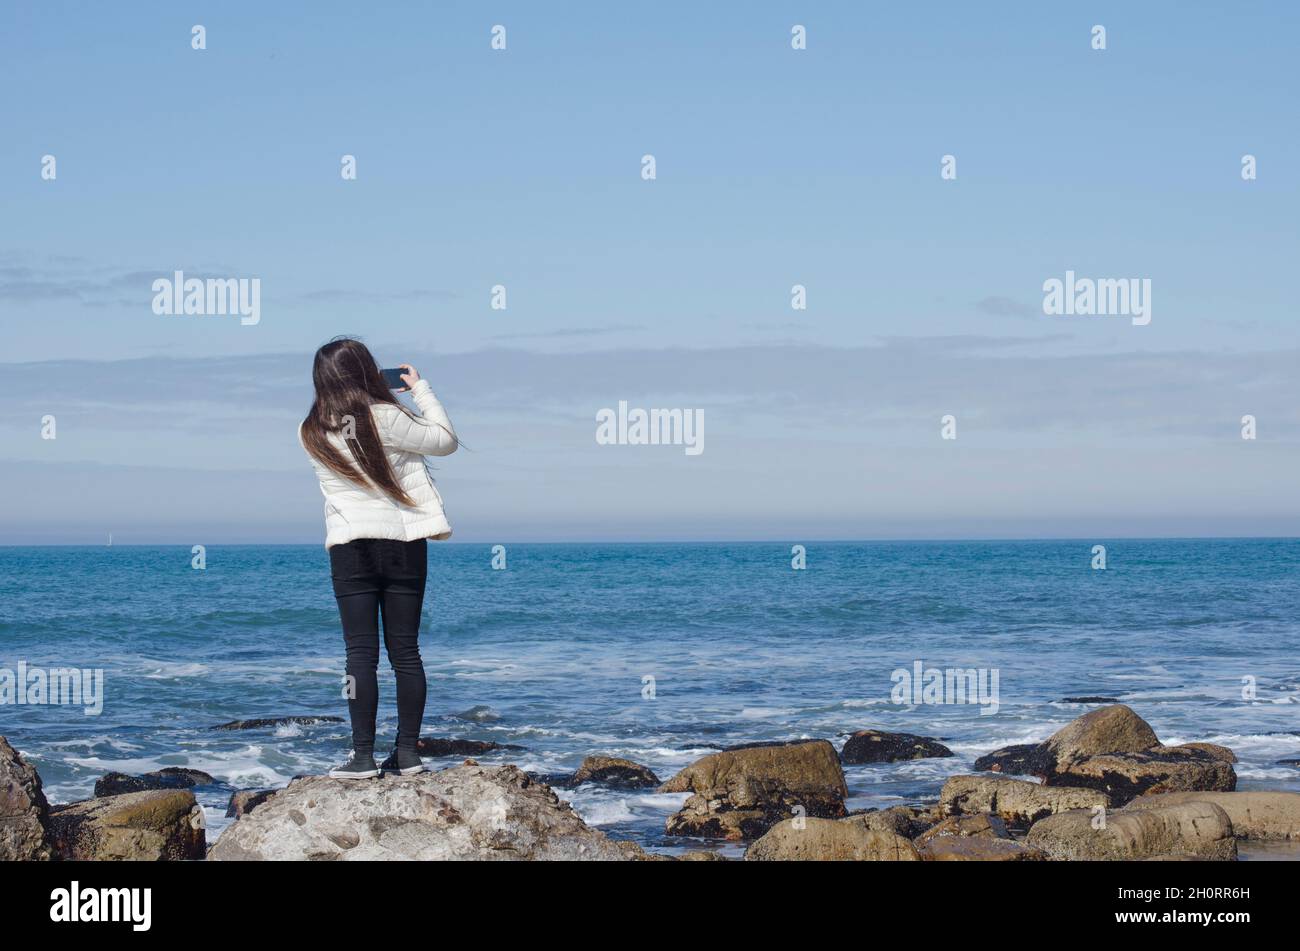 Rear view of a teenage girl standing on a rock taking a photo, Mar del Plata, Buenos Aires Province, Argentina Stock Photo